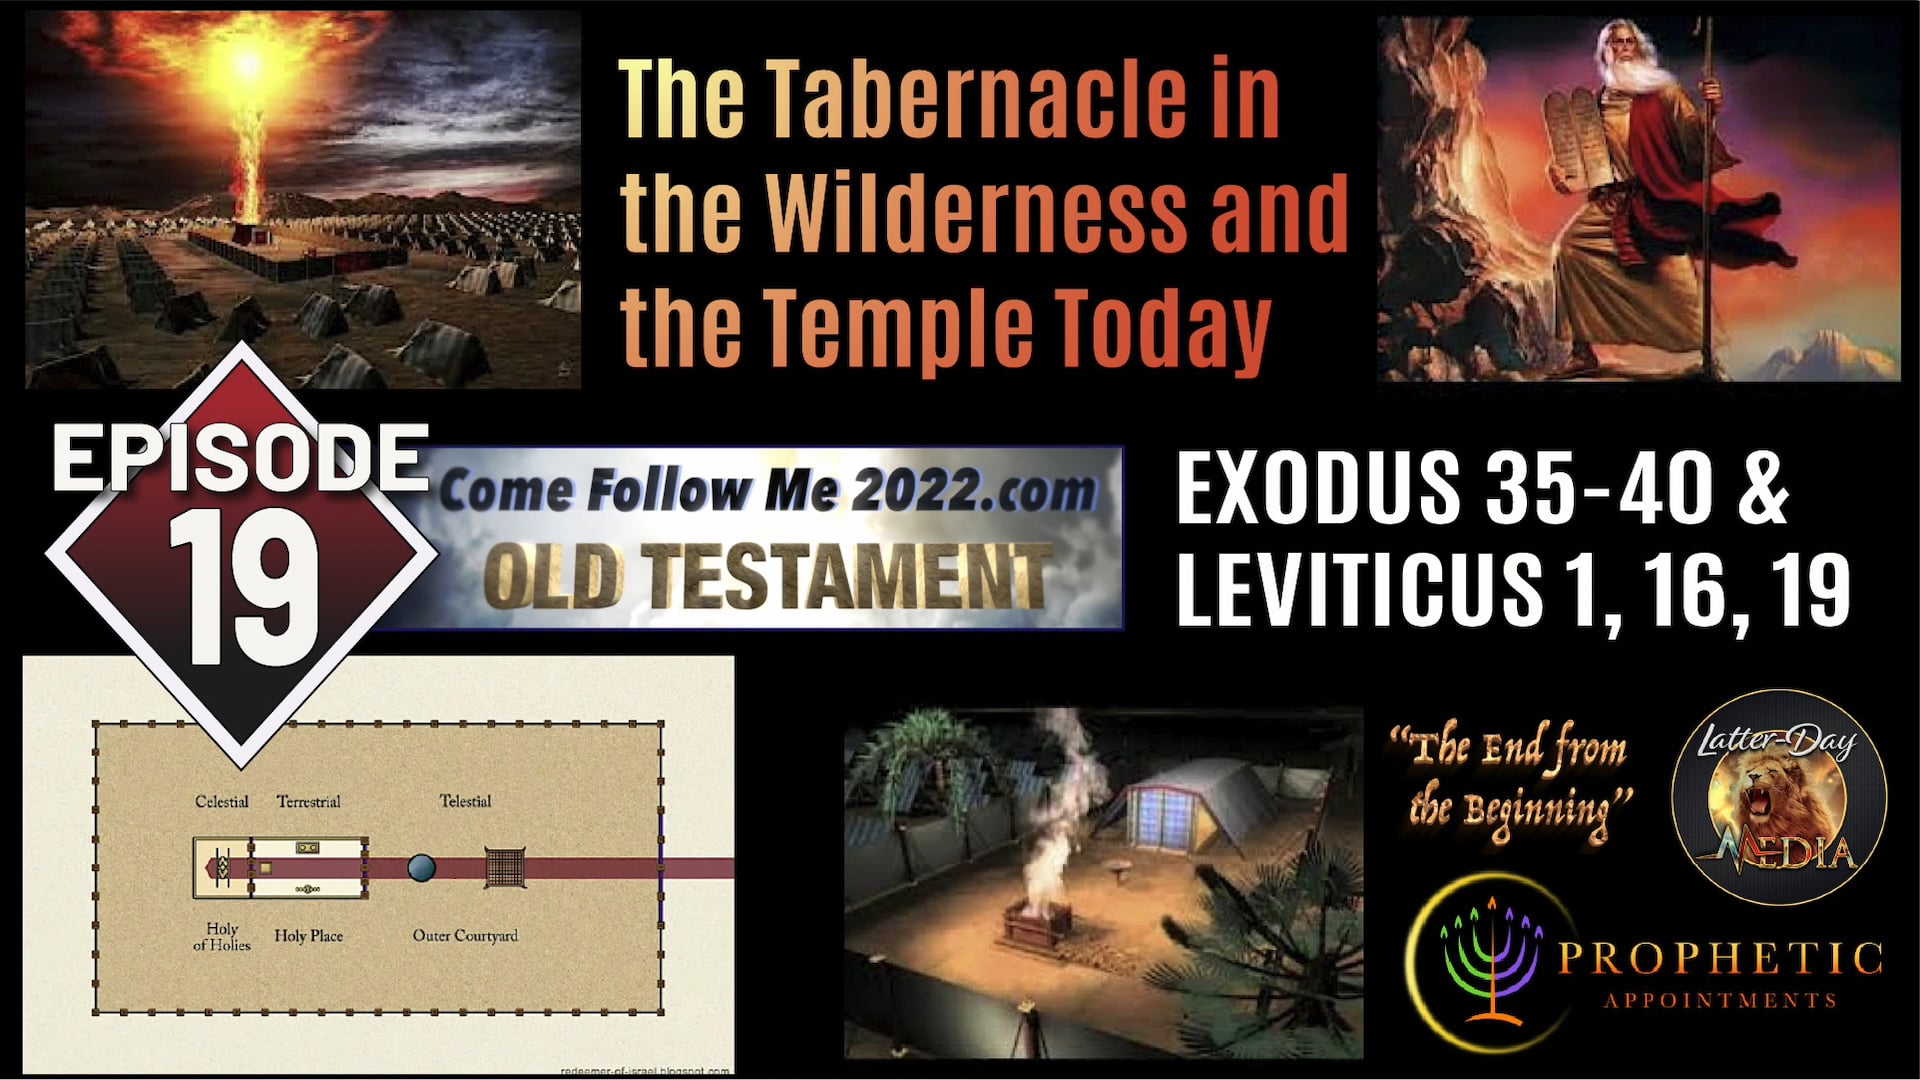 EP 19 Exodus 35-40, Leviticus 1,16,19 Pickerings Tabernacle-Temple Today